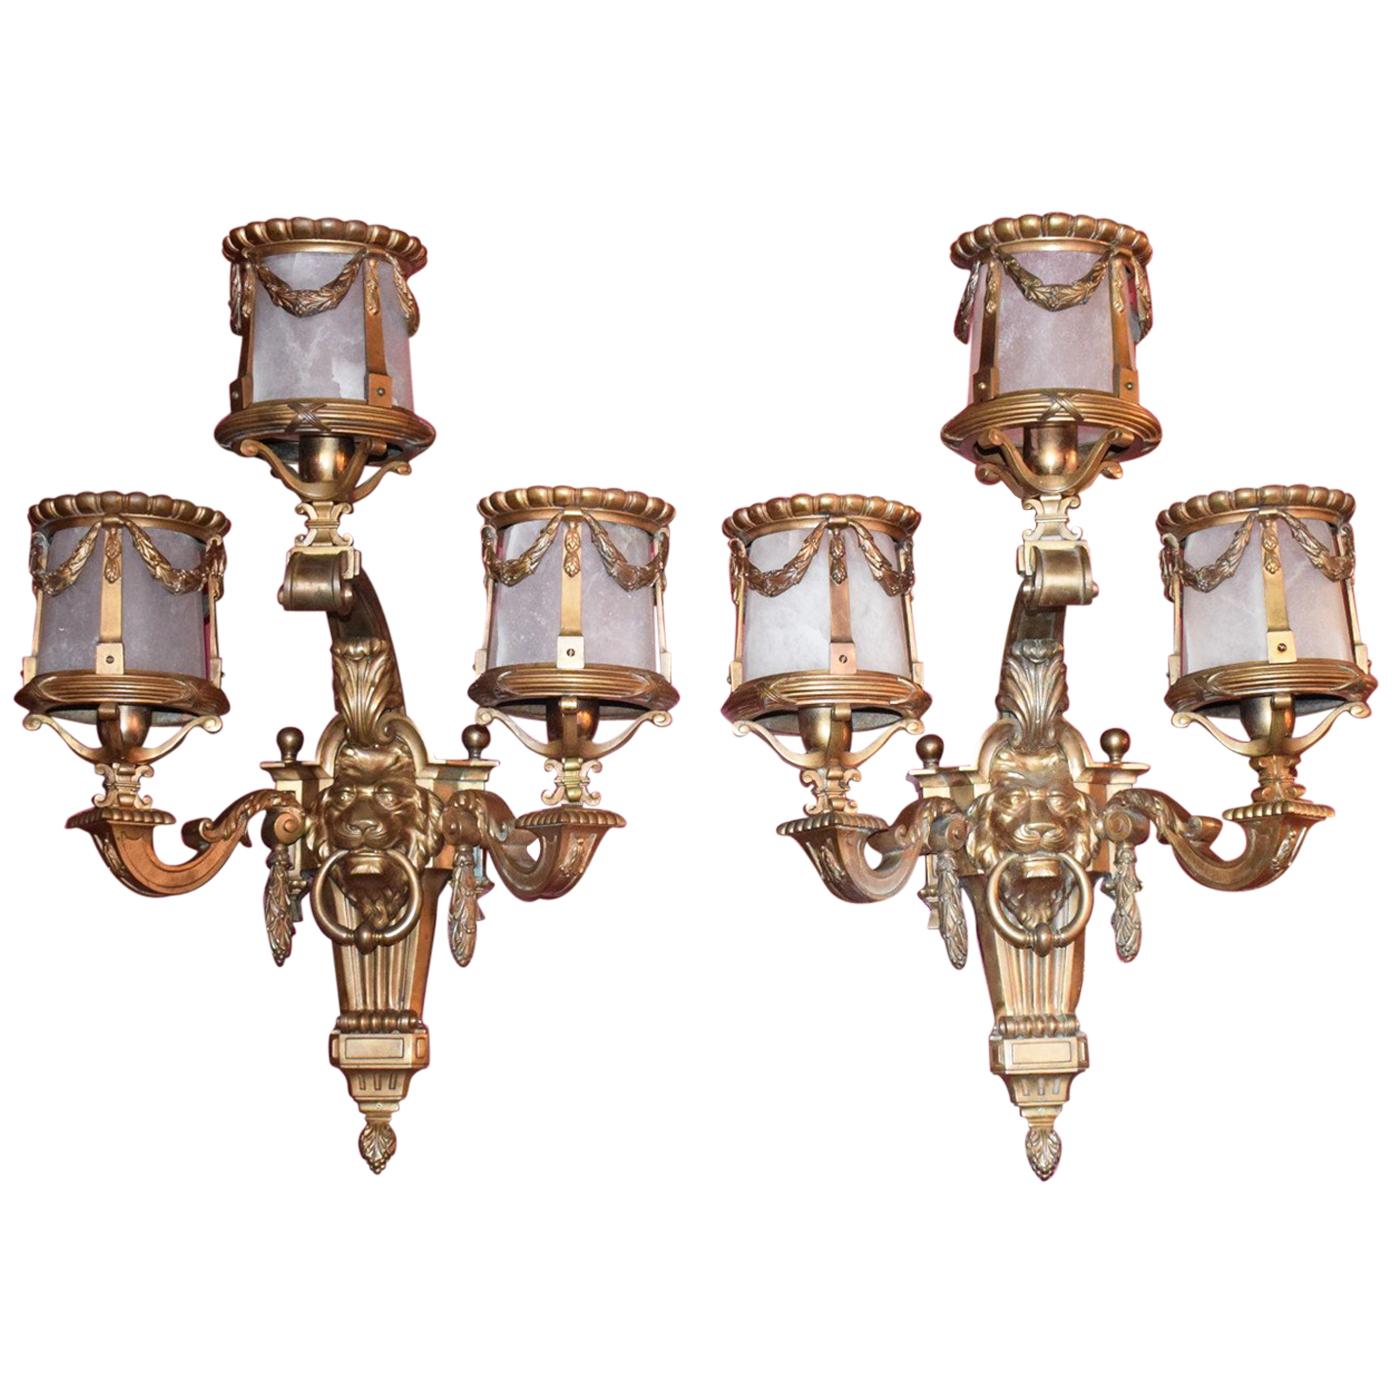 Antique Sconces with Alabaster Shades